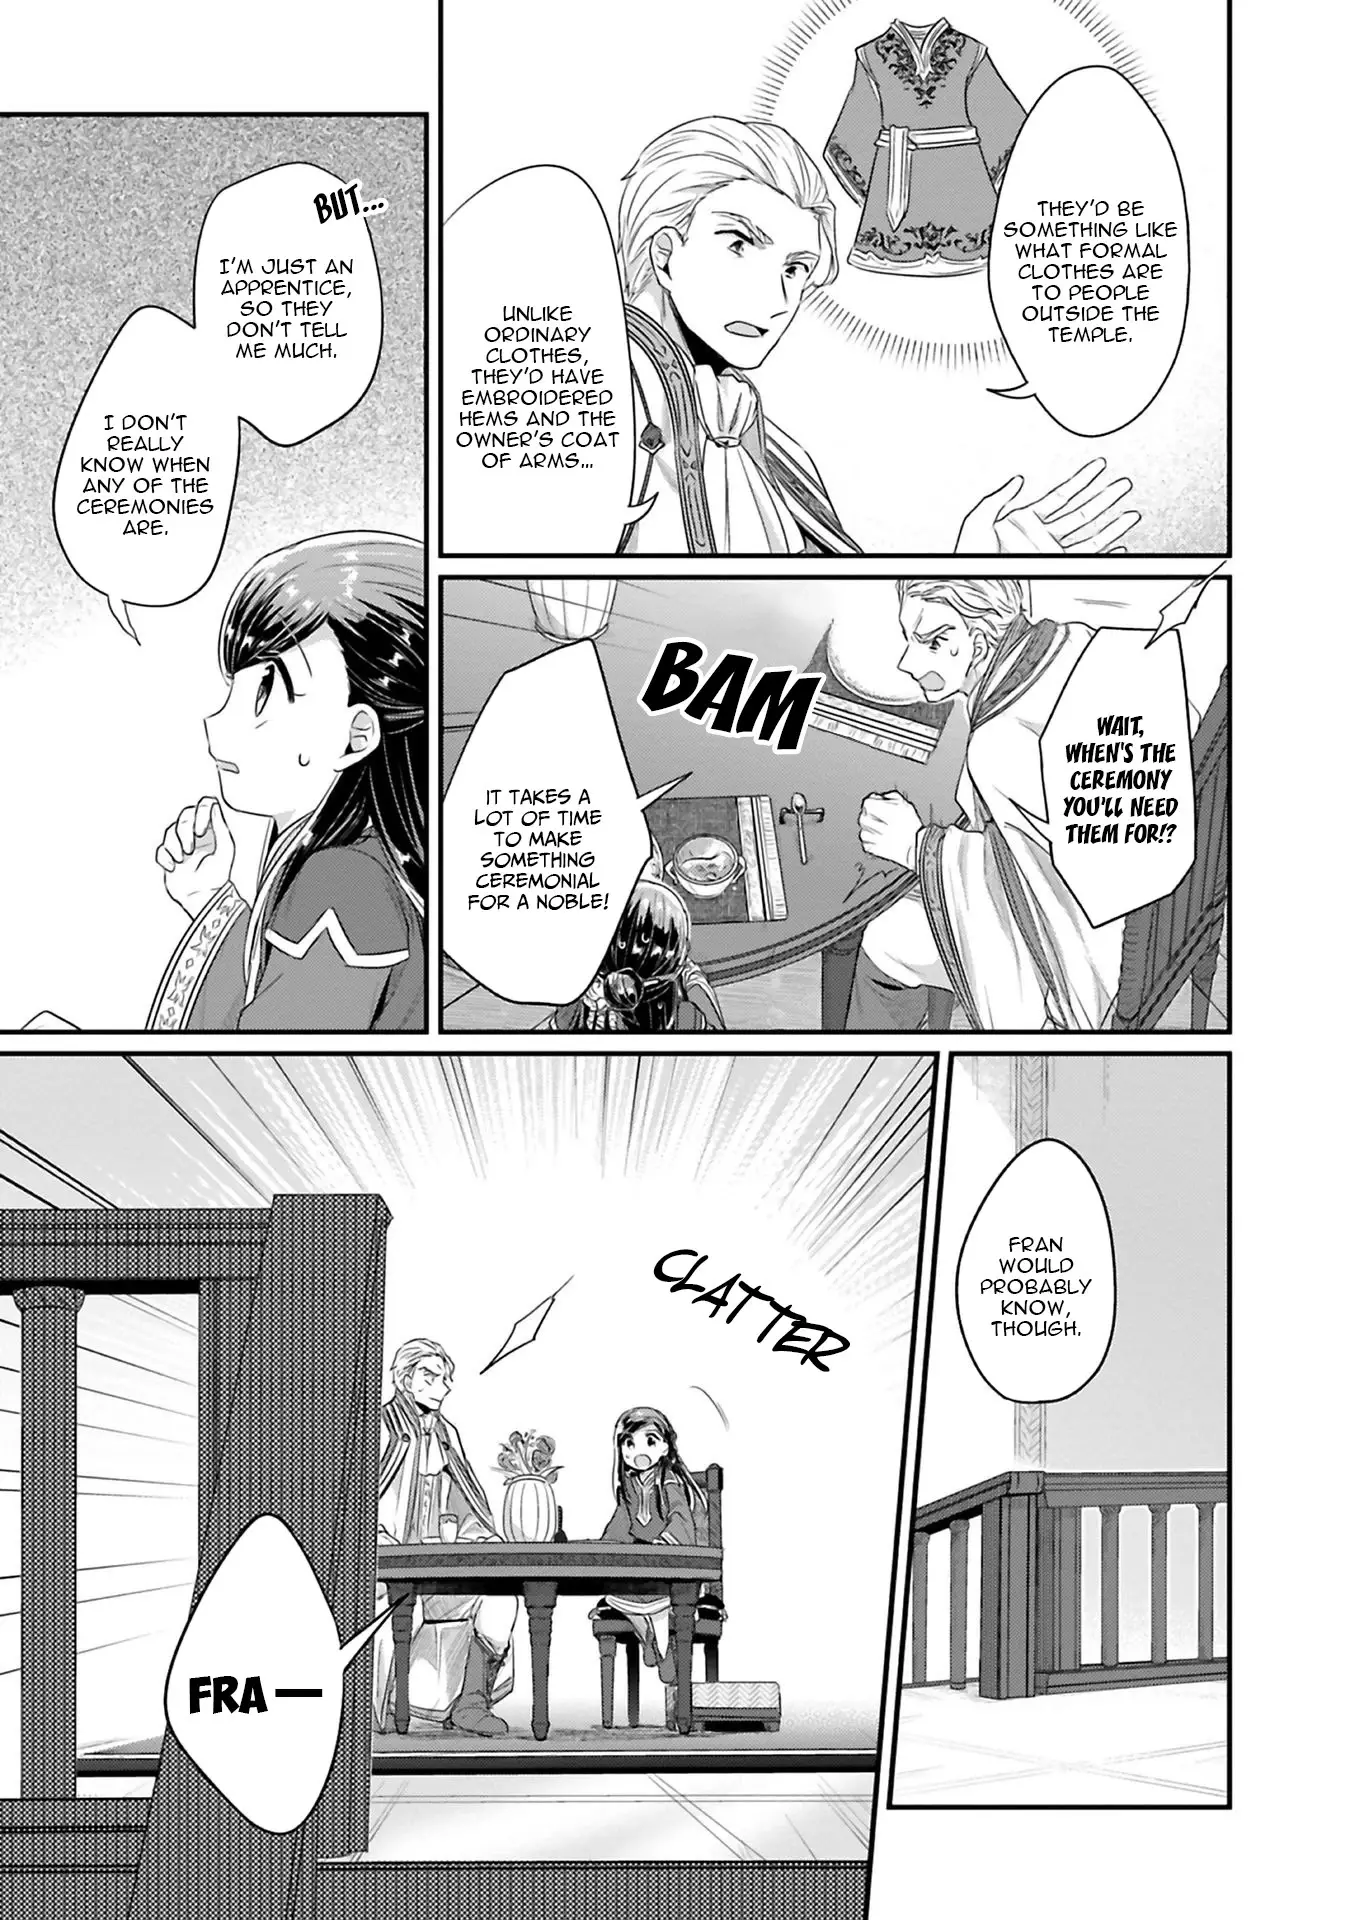 Ascendance Of A Bookworm ~I'll Do Anything To Become A Librarian~ Part 2 「I'll Become A Shrine Maiden For Books!」 - 7 page 6